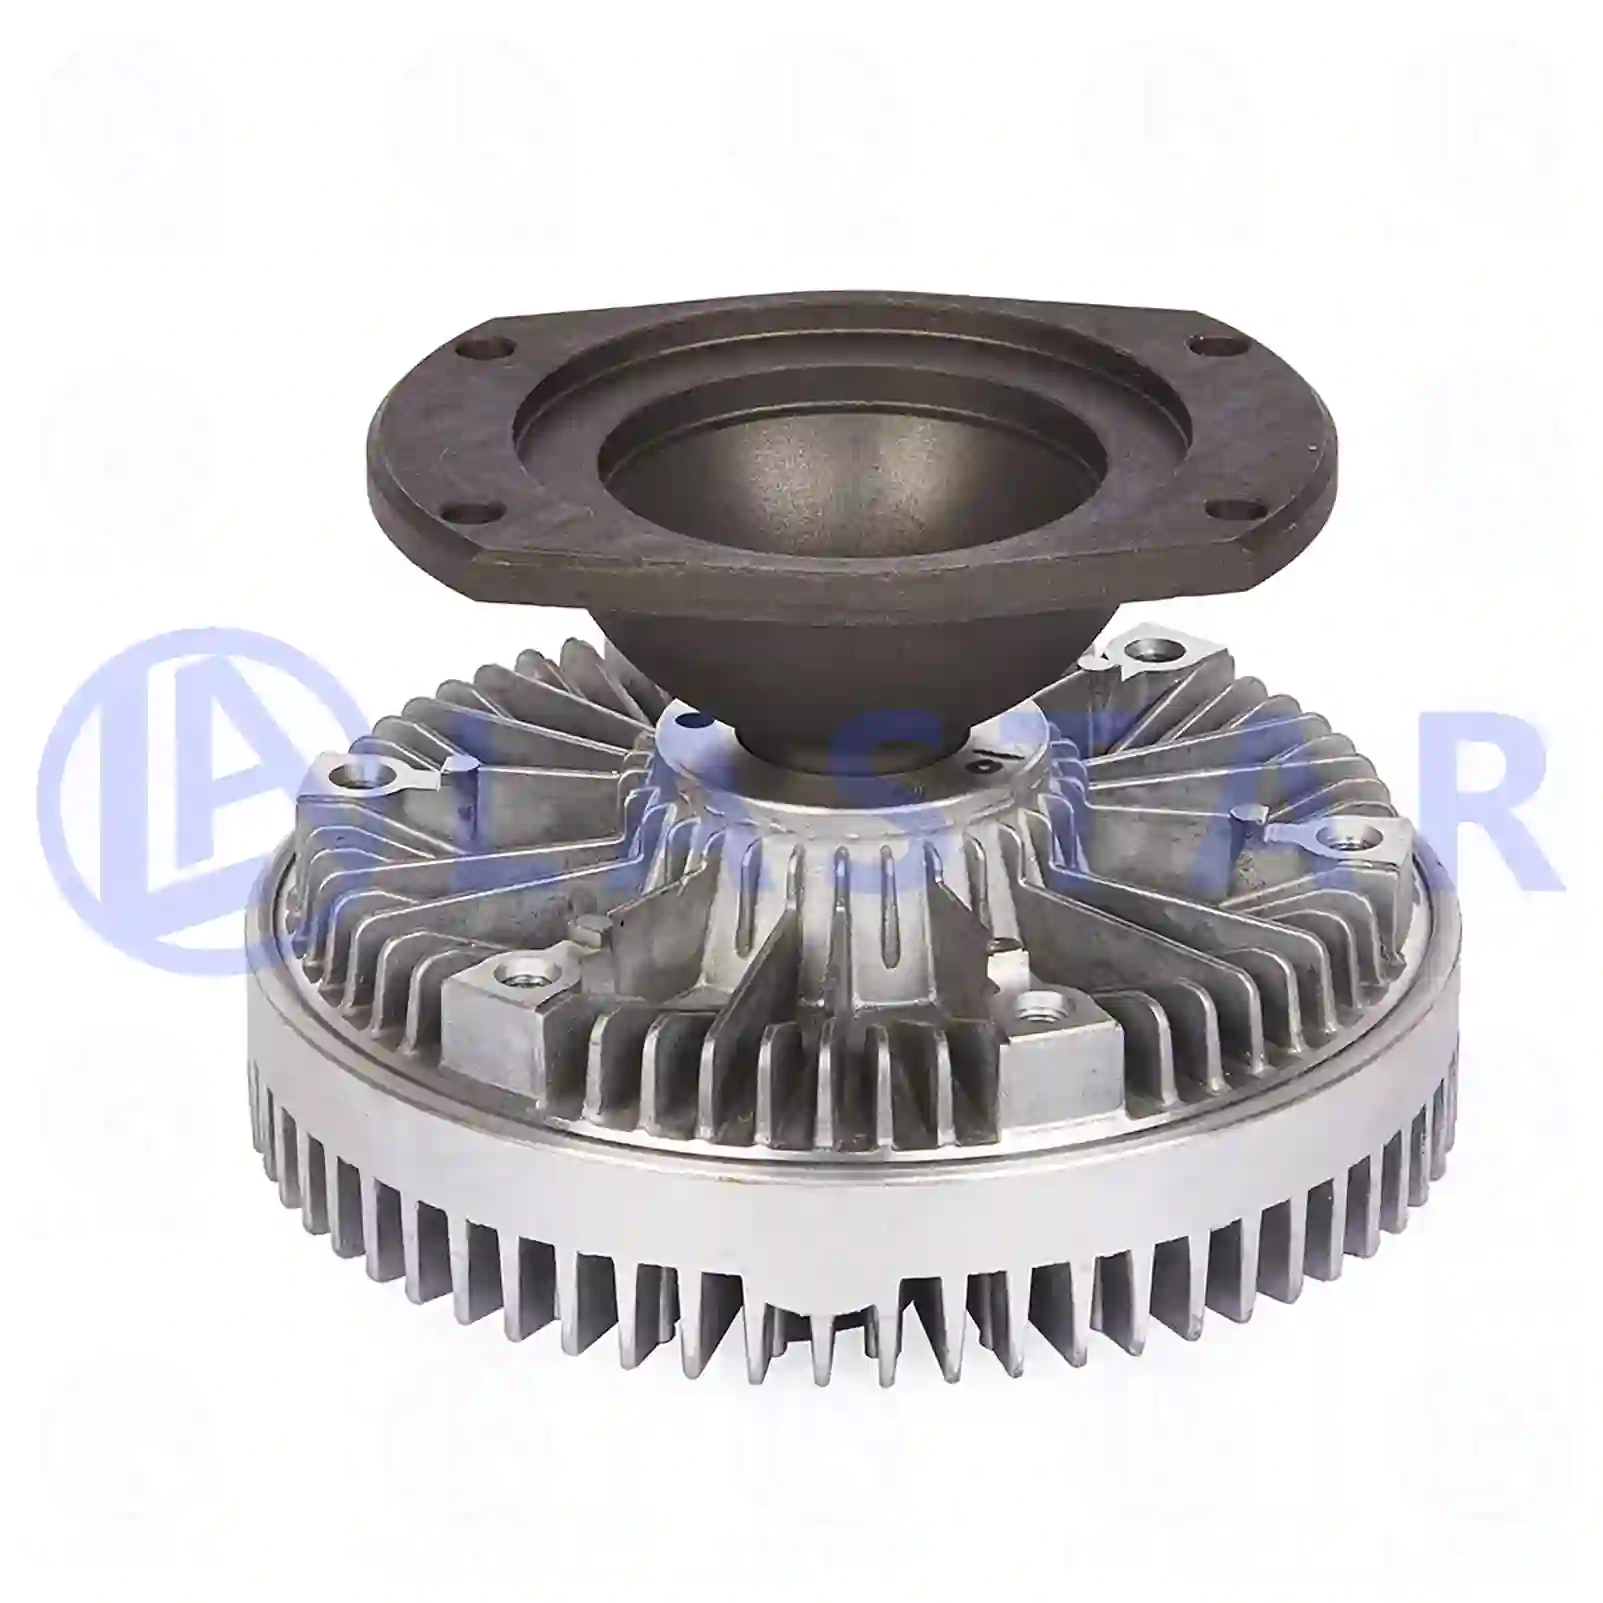 Fan clutch, 77708837, 500345817, 500345819, 93190925 ||  77708837 Lastar Spare Part | Truck Spare Parts, Auotomotive Spare Parts Fan clutch, 77708837, 500345817, 500345819, 93190925 ||  77708837 Lastar Spare Part | Truck Spare Parts, Auotomotive Spare Parts